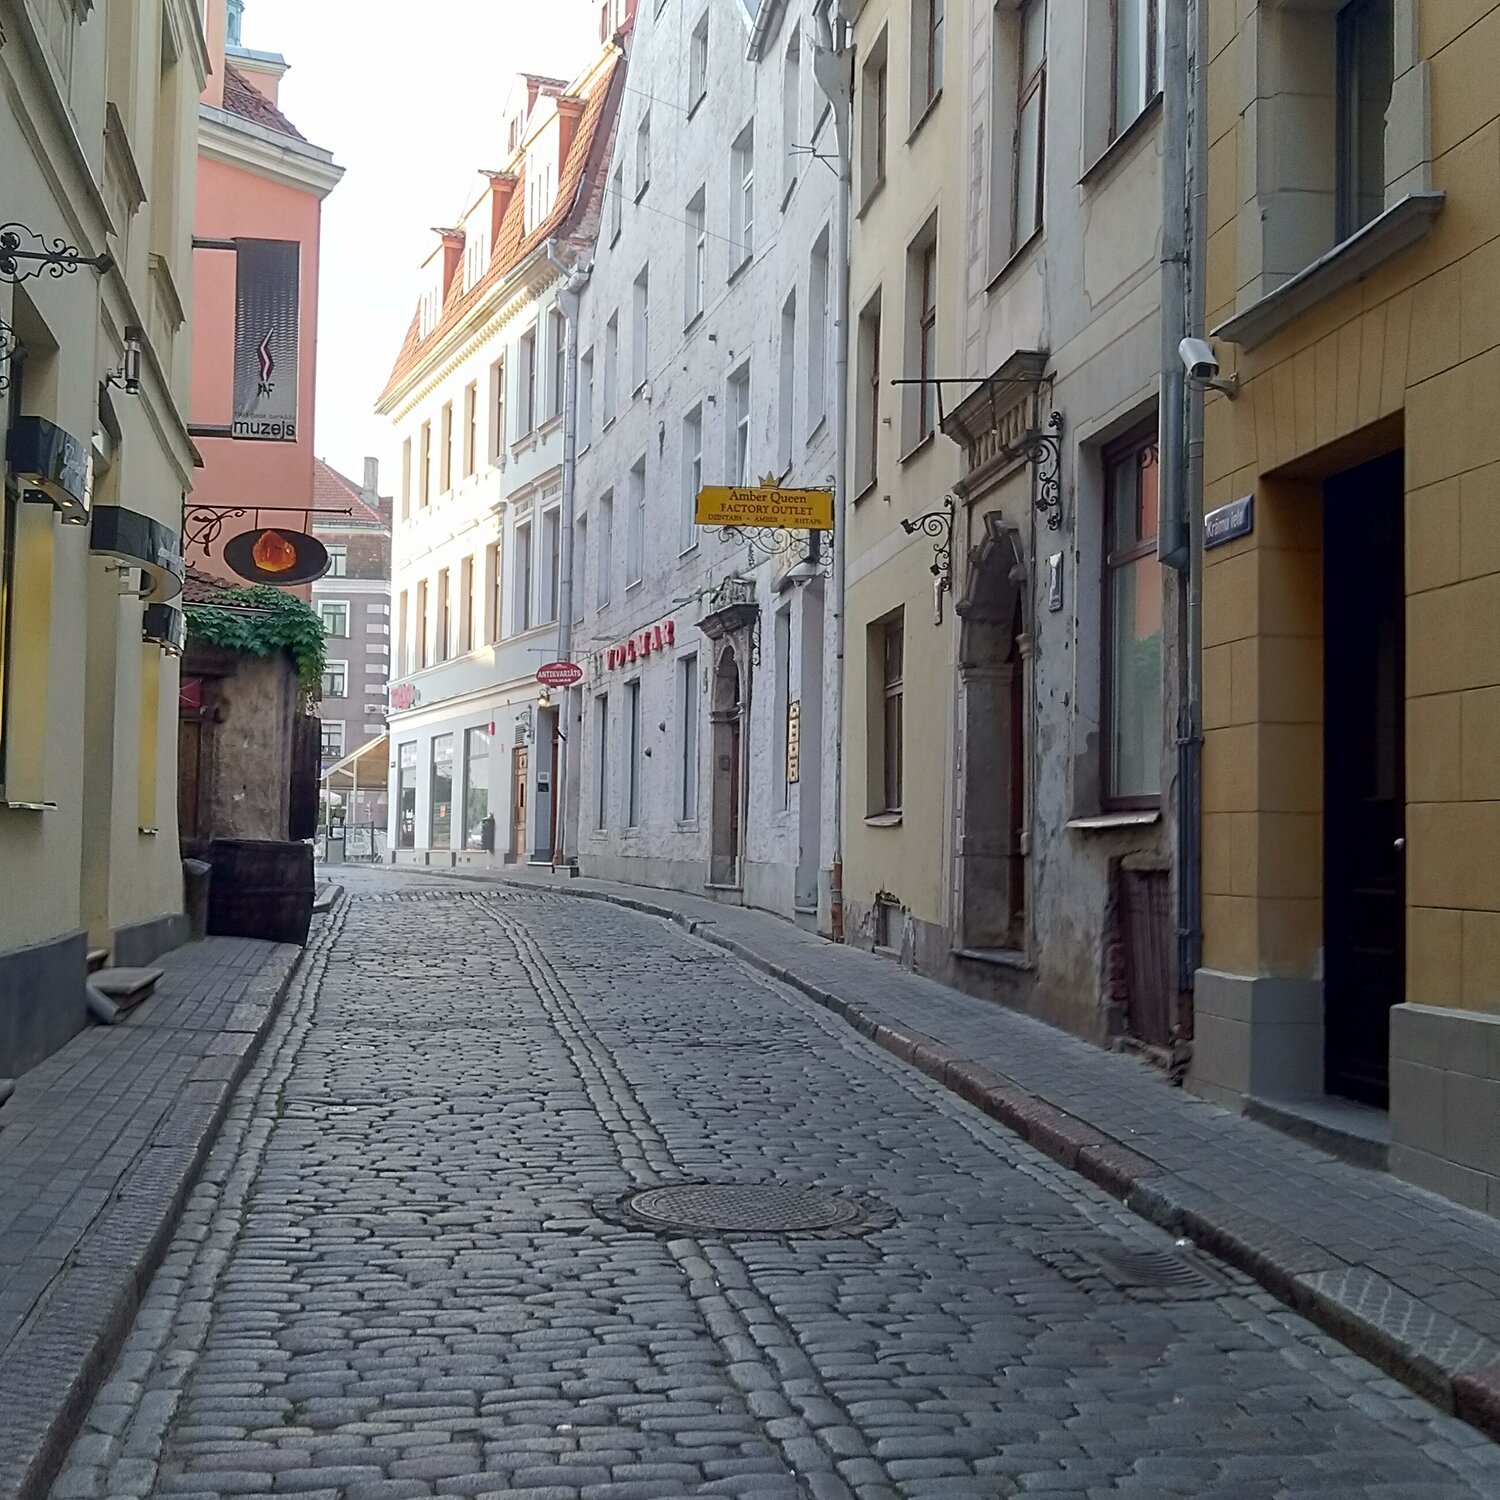 Riga districts: where to stay and how to save money?